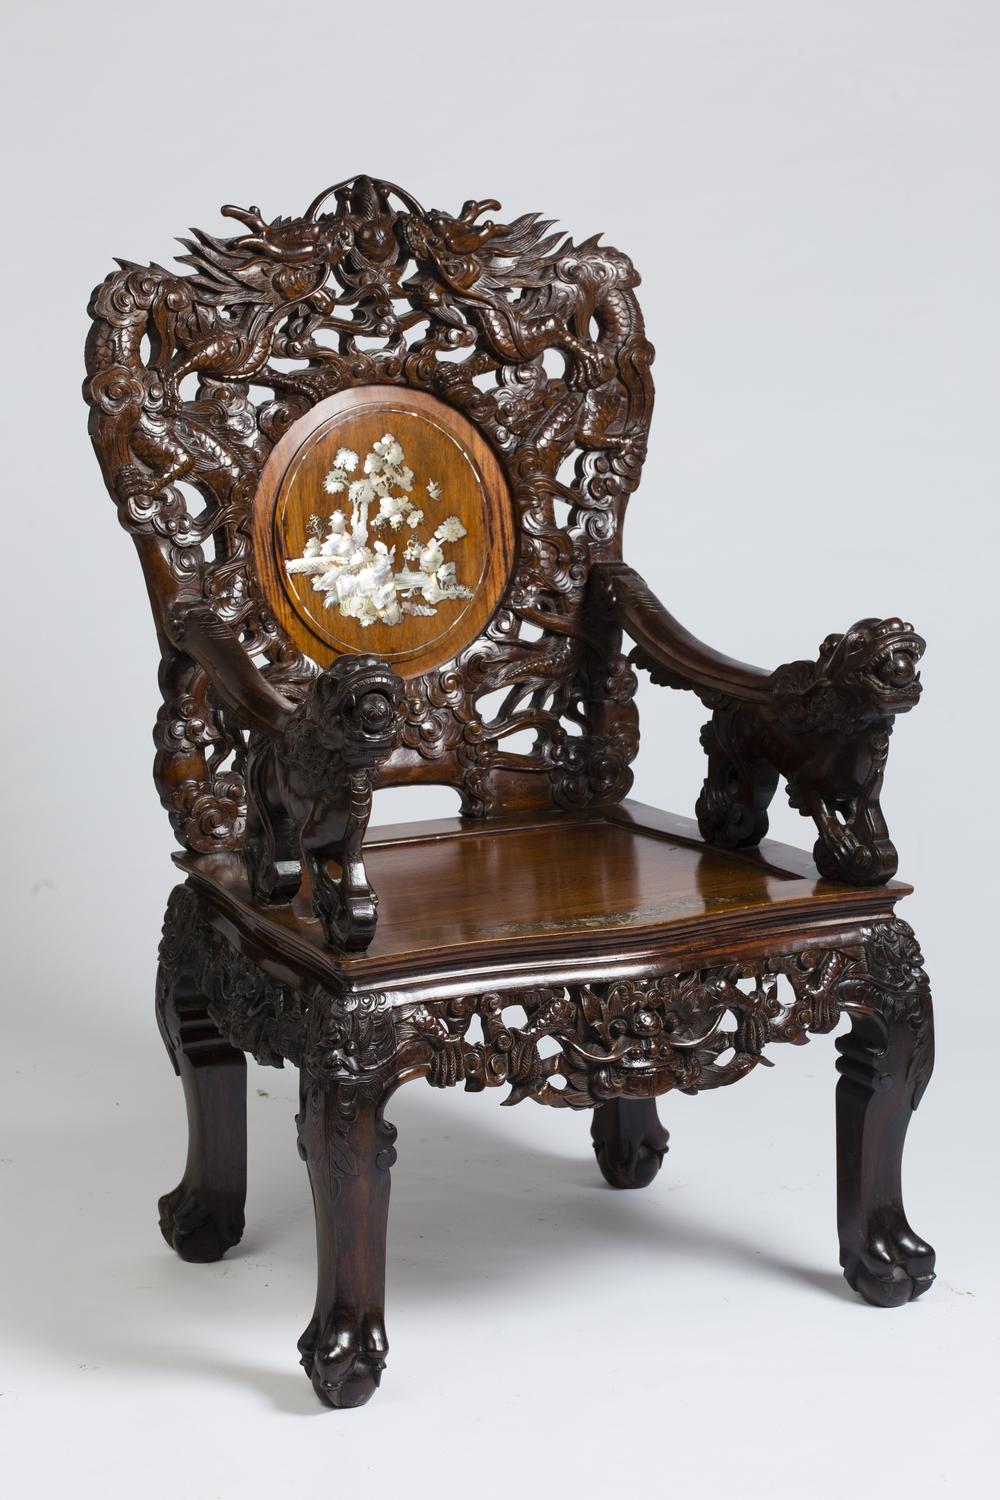 Pair of Indochinese armchairs, circa 1880-1900, in finely carved and openwork ironwood, inlaid with a rich decoration of mother of pearl Marquetry.
The two armchairs are identical but each mother of pearl medallion has a different decor.